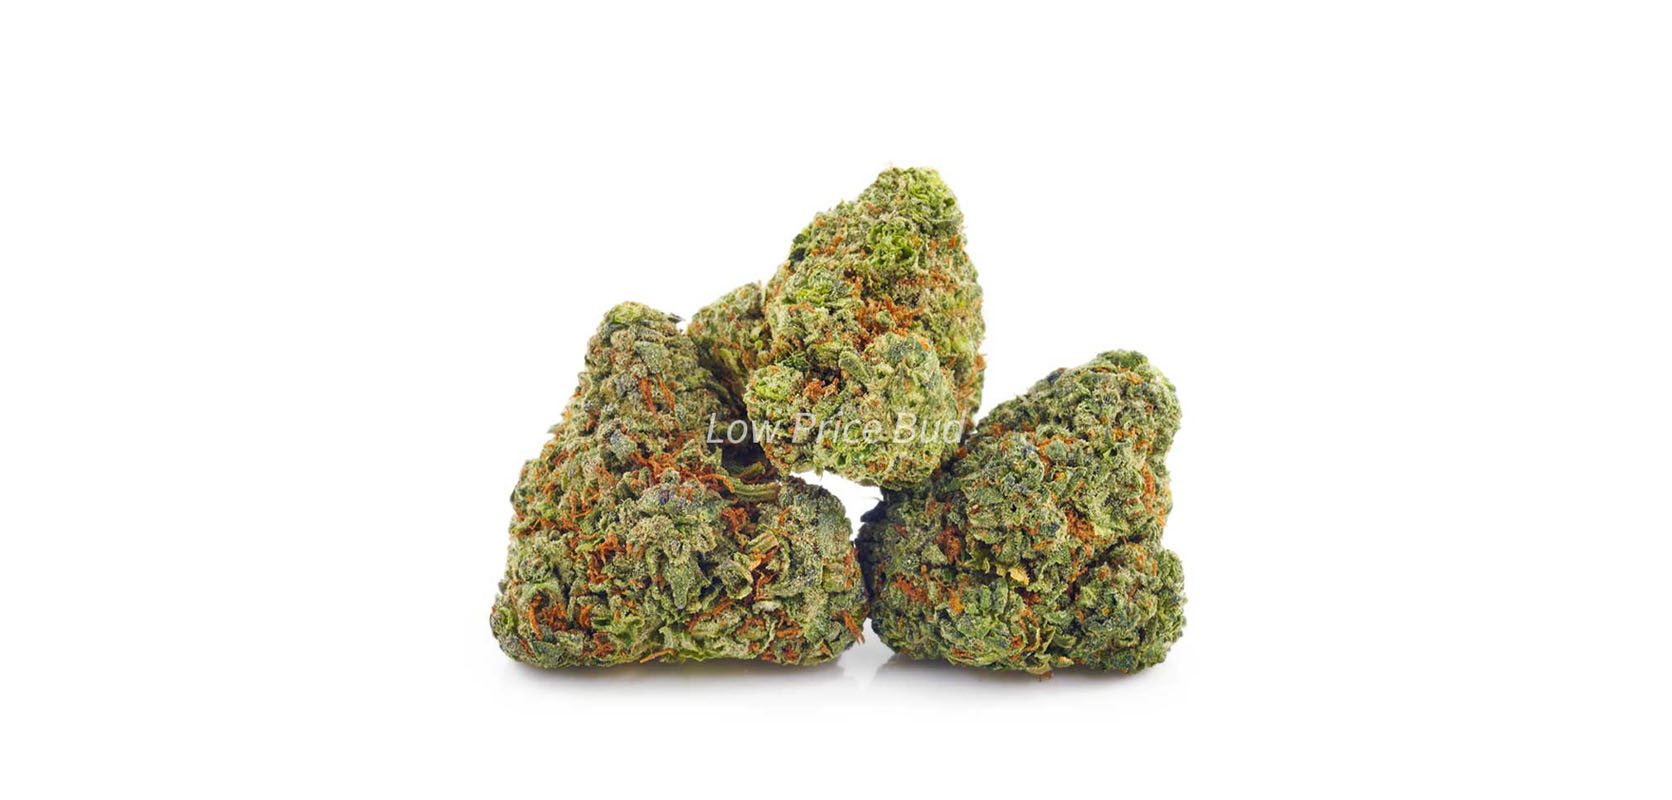 Honey Badger buds. Buy weed online from BC Cannabis online dispensary Low Price Bud.